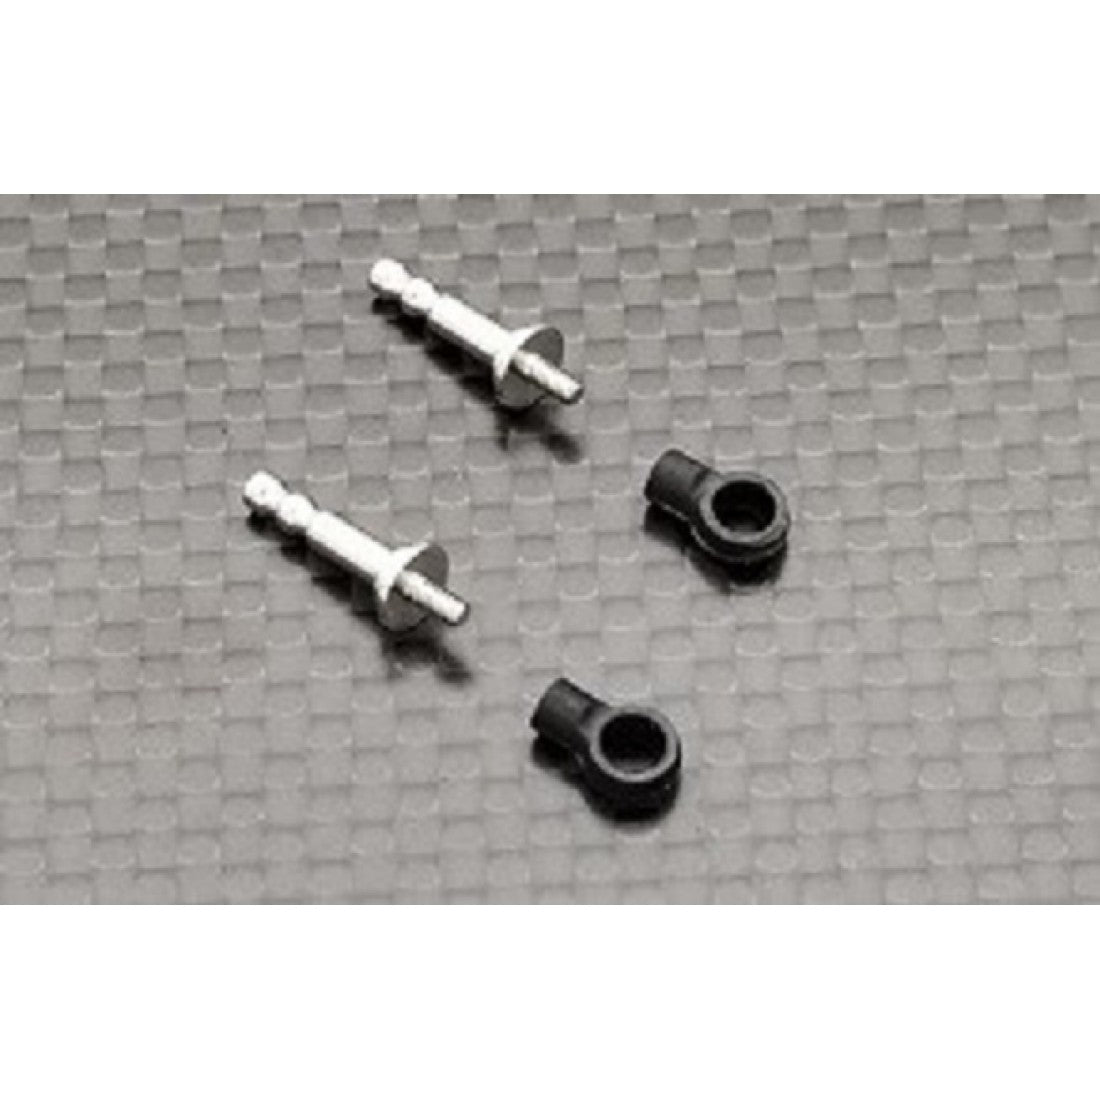 GLR Metal Piston Rod For Side Dampers - Iron City RC Hobbies